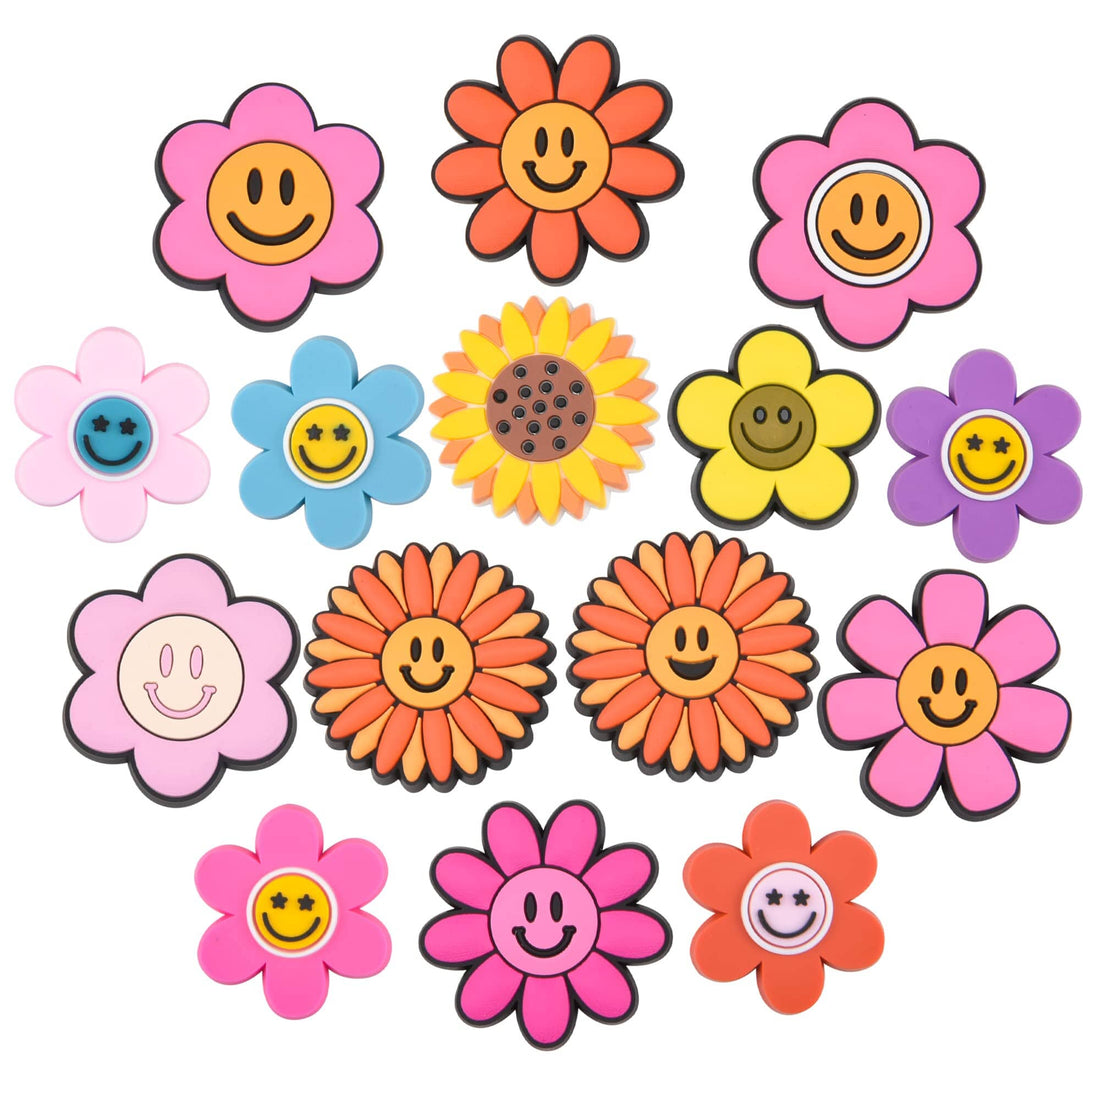 15 Pieces Smile Face Shoe Charms Kids Boys Girls Colorful Flower Shoes Accessories for Party Favor FC15-5 Charms for ClipUp POSHYC 